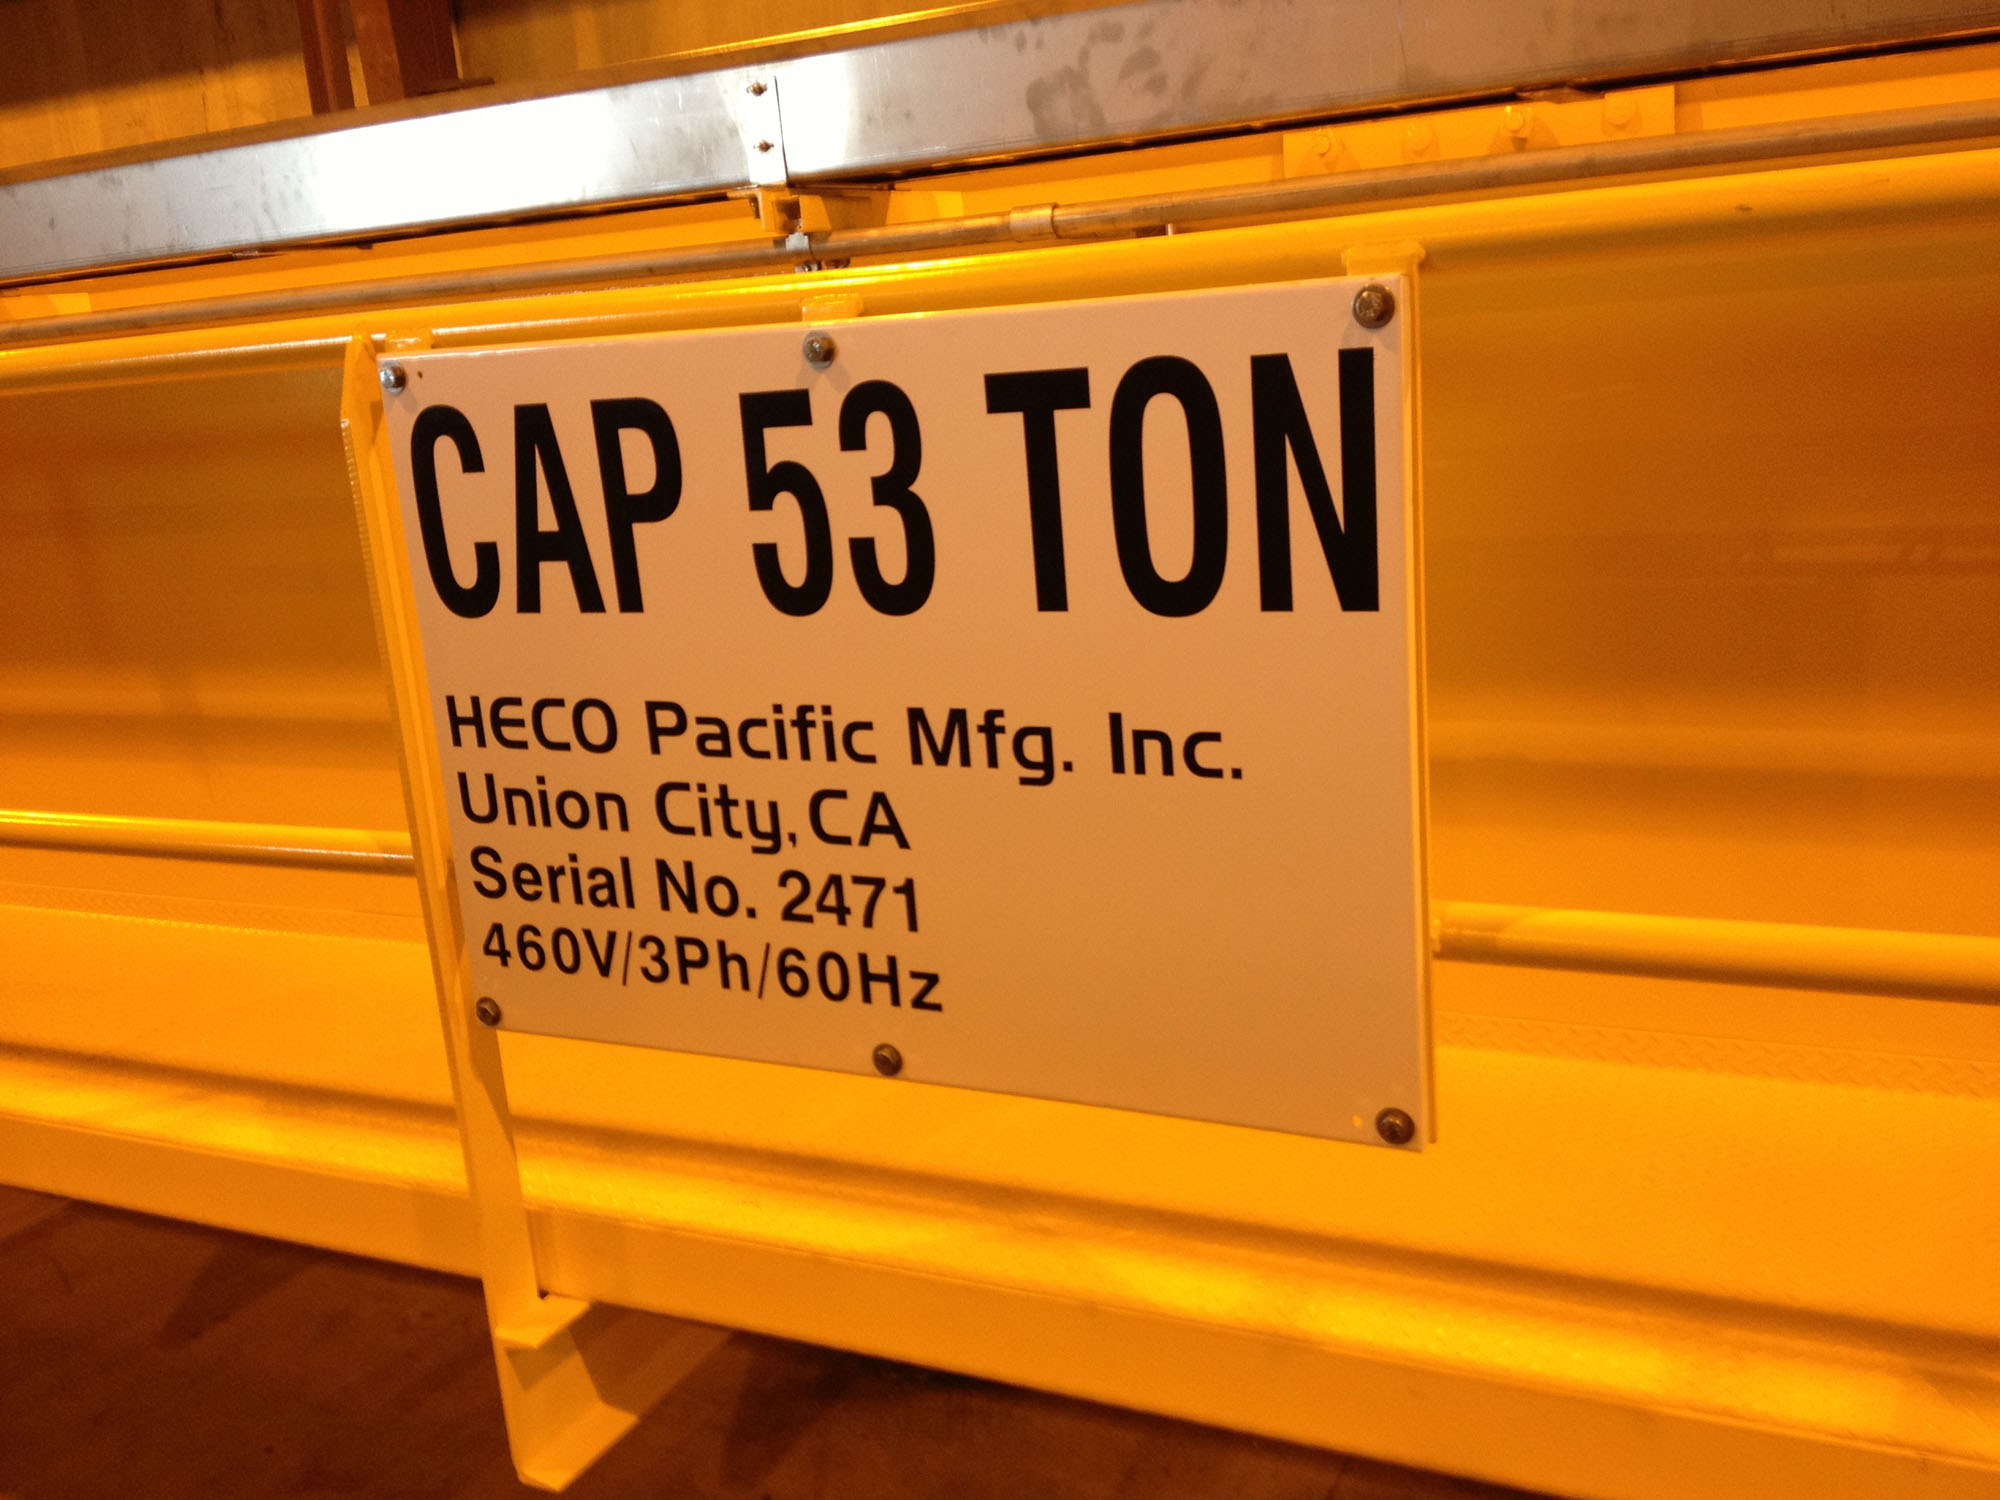 High Capacity Cranes Fabricated at Heco Pacific